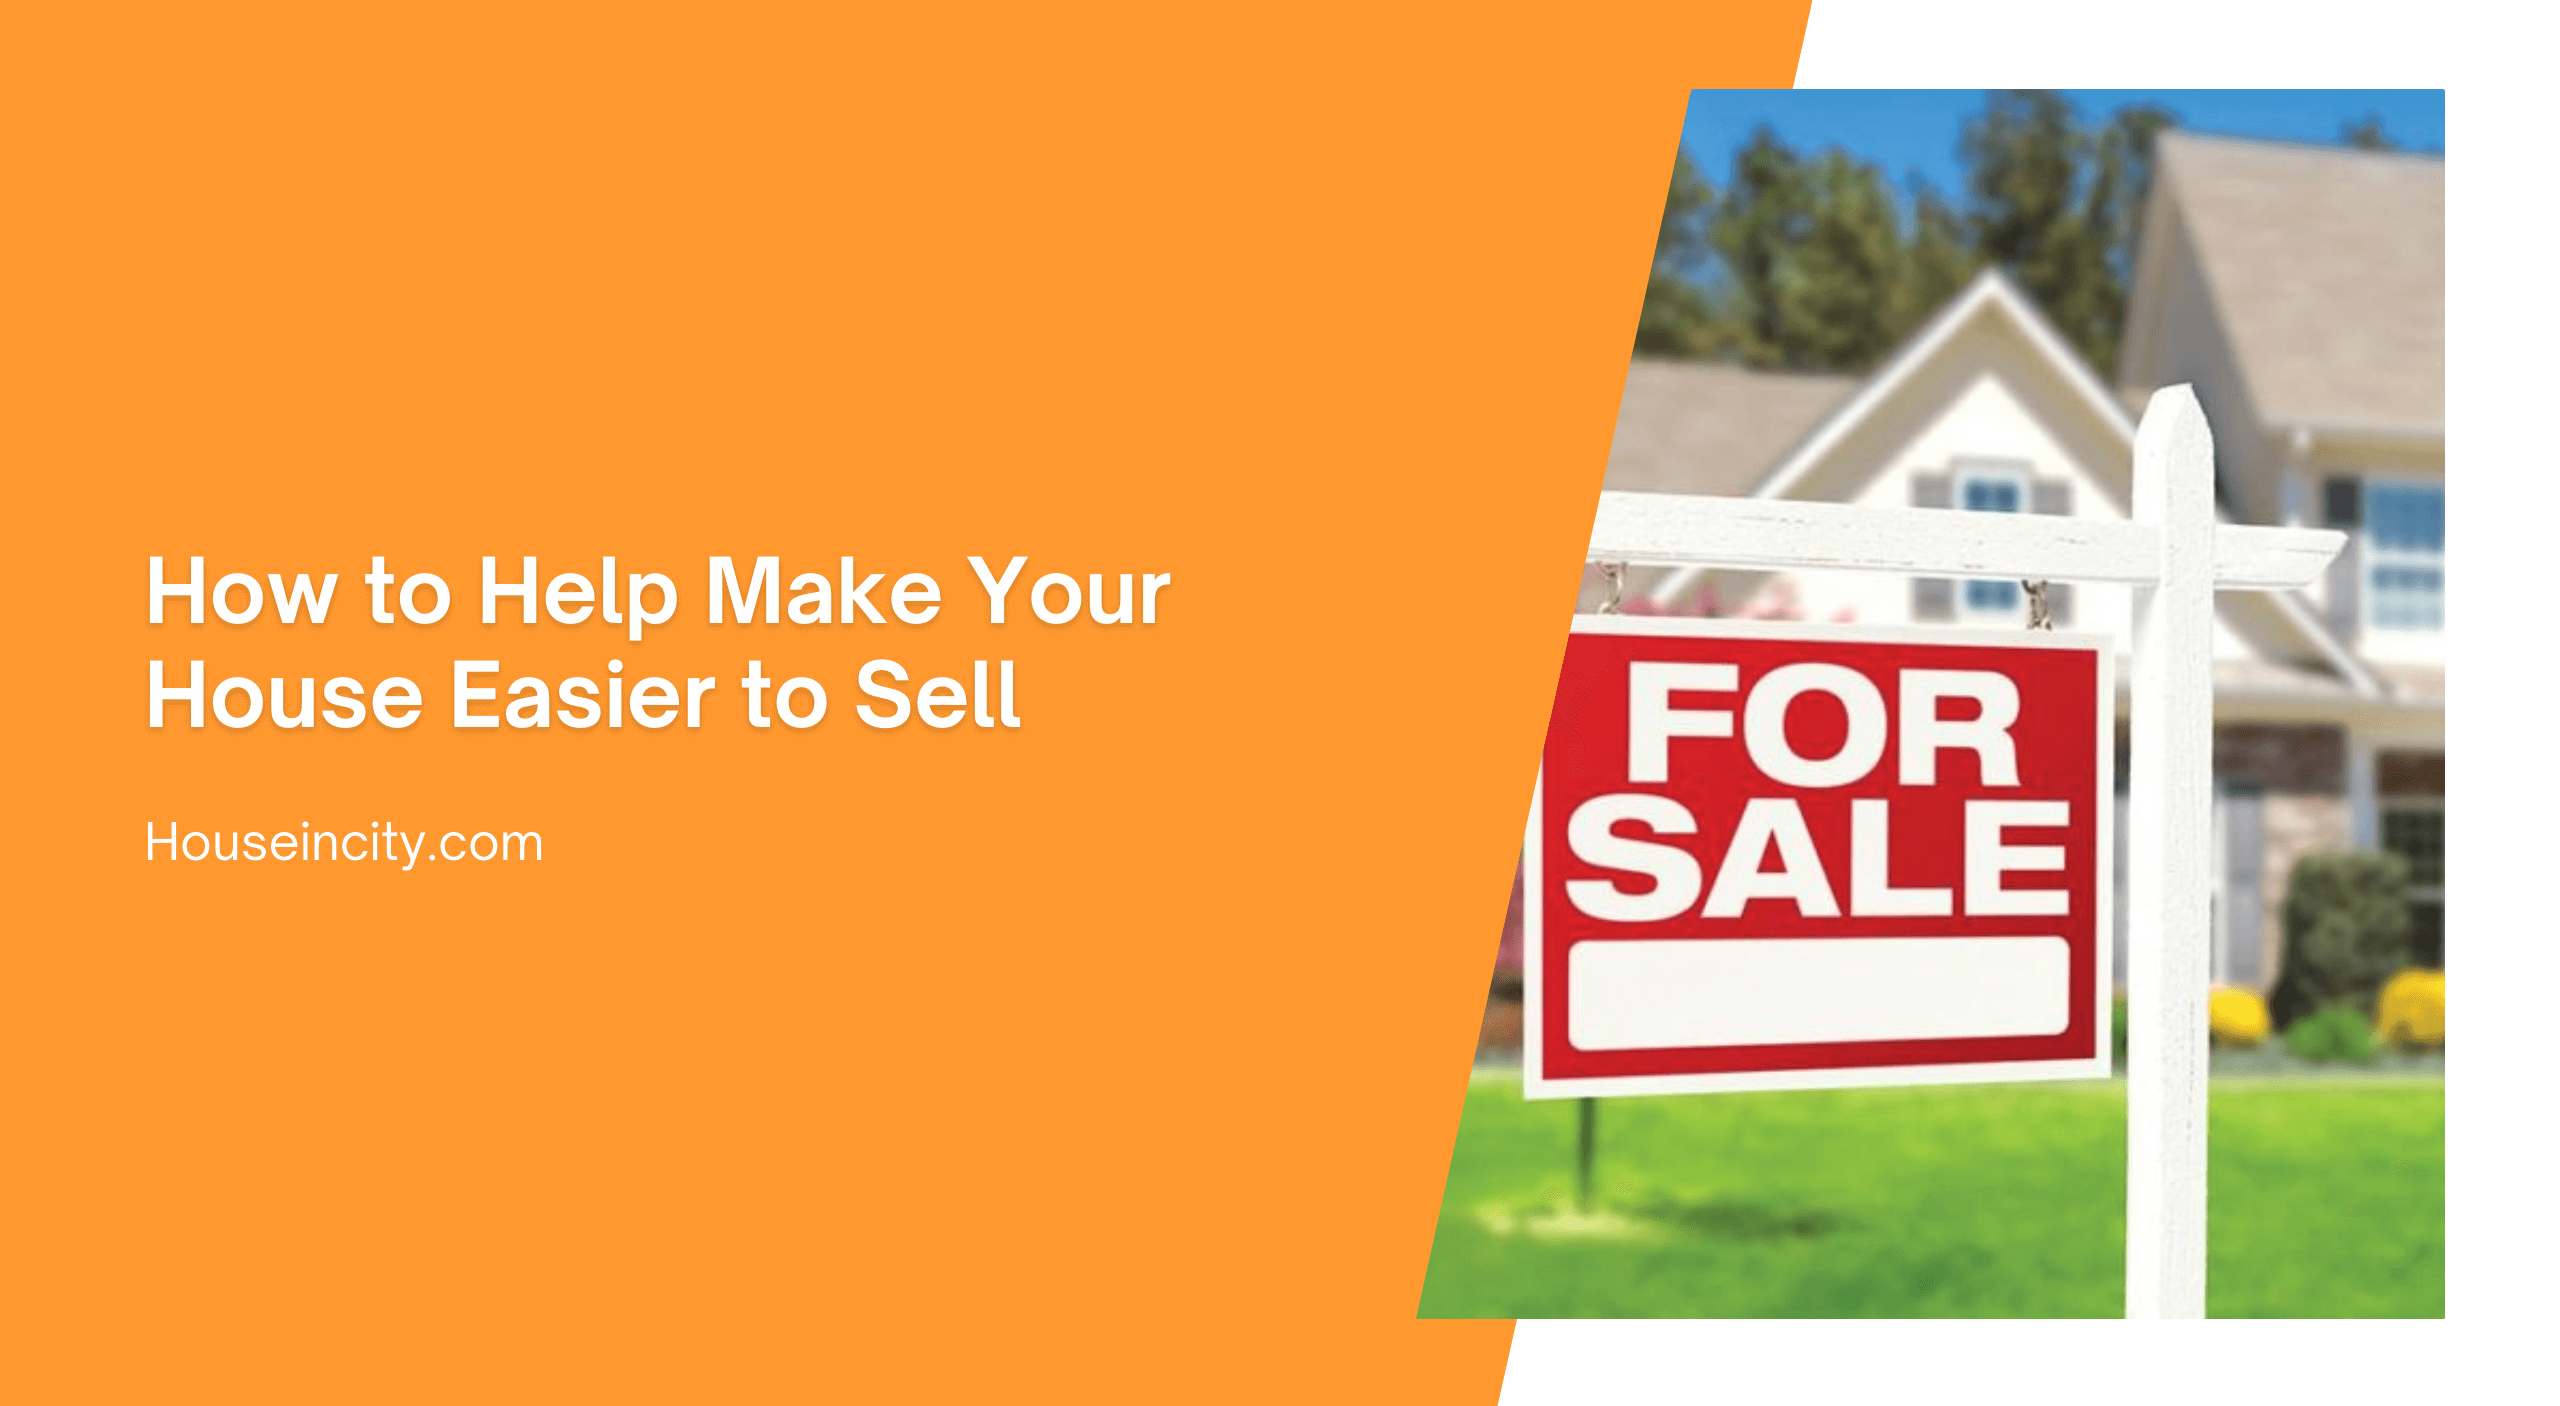 How to Help Make Your House Easier to Sell